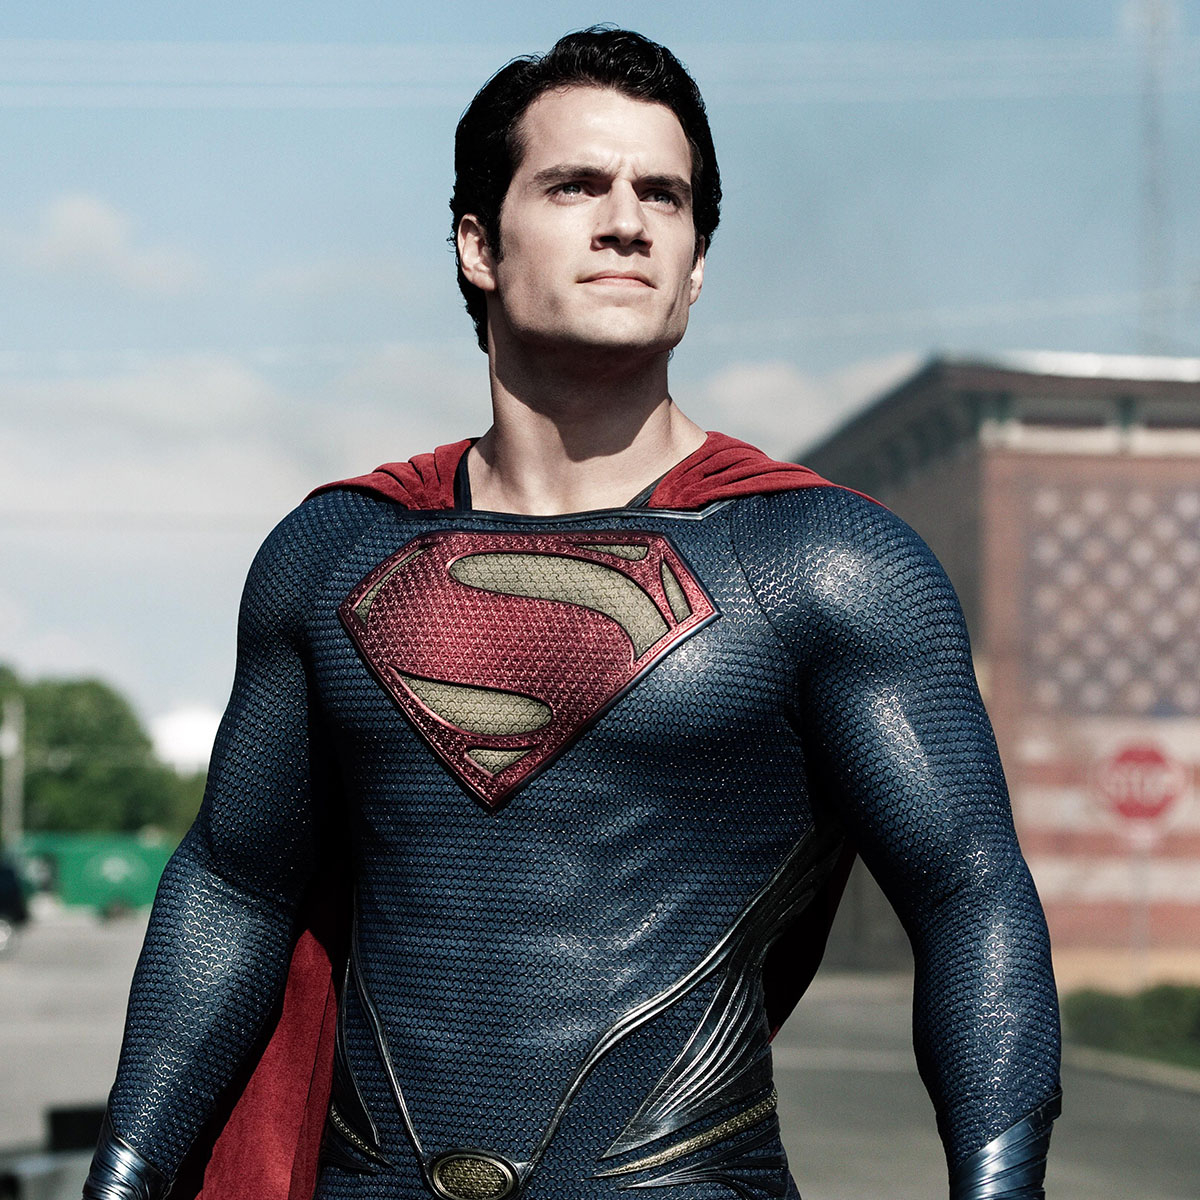 Who Will Play Superman? Henry Cavill Will No Longer Star in Role